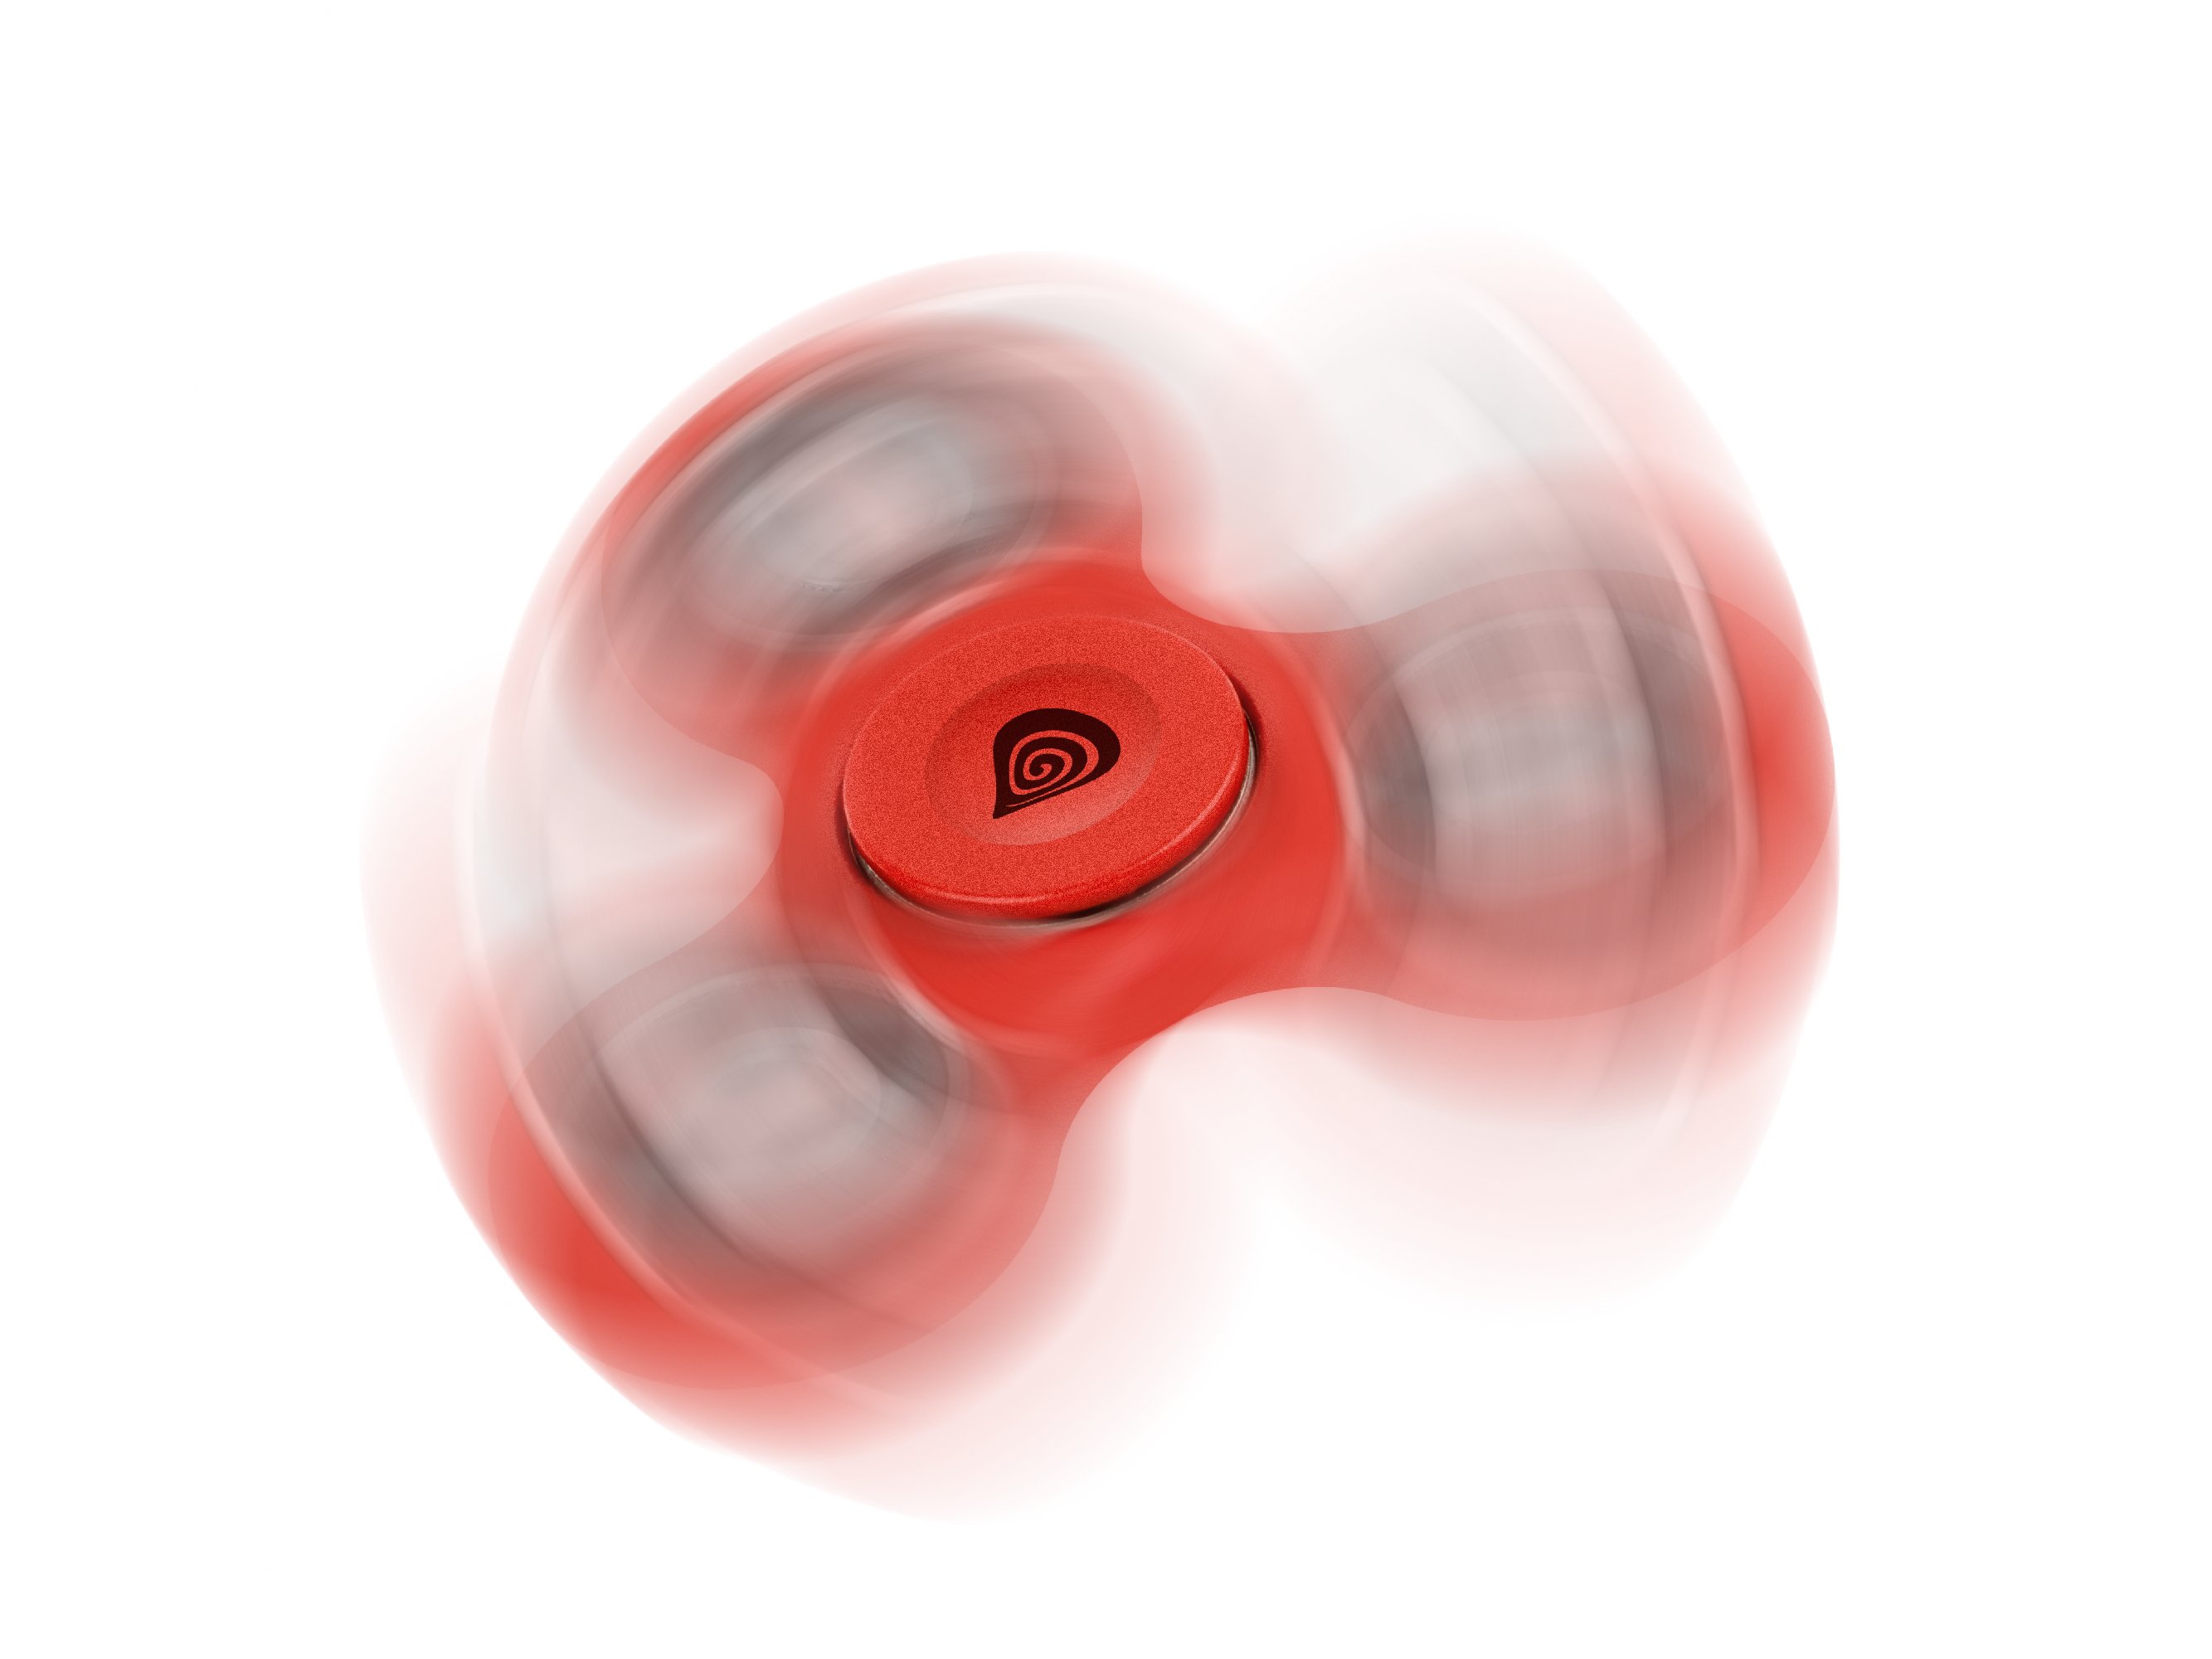 Red spinning